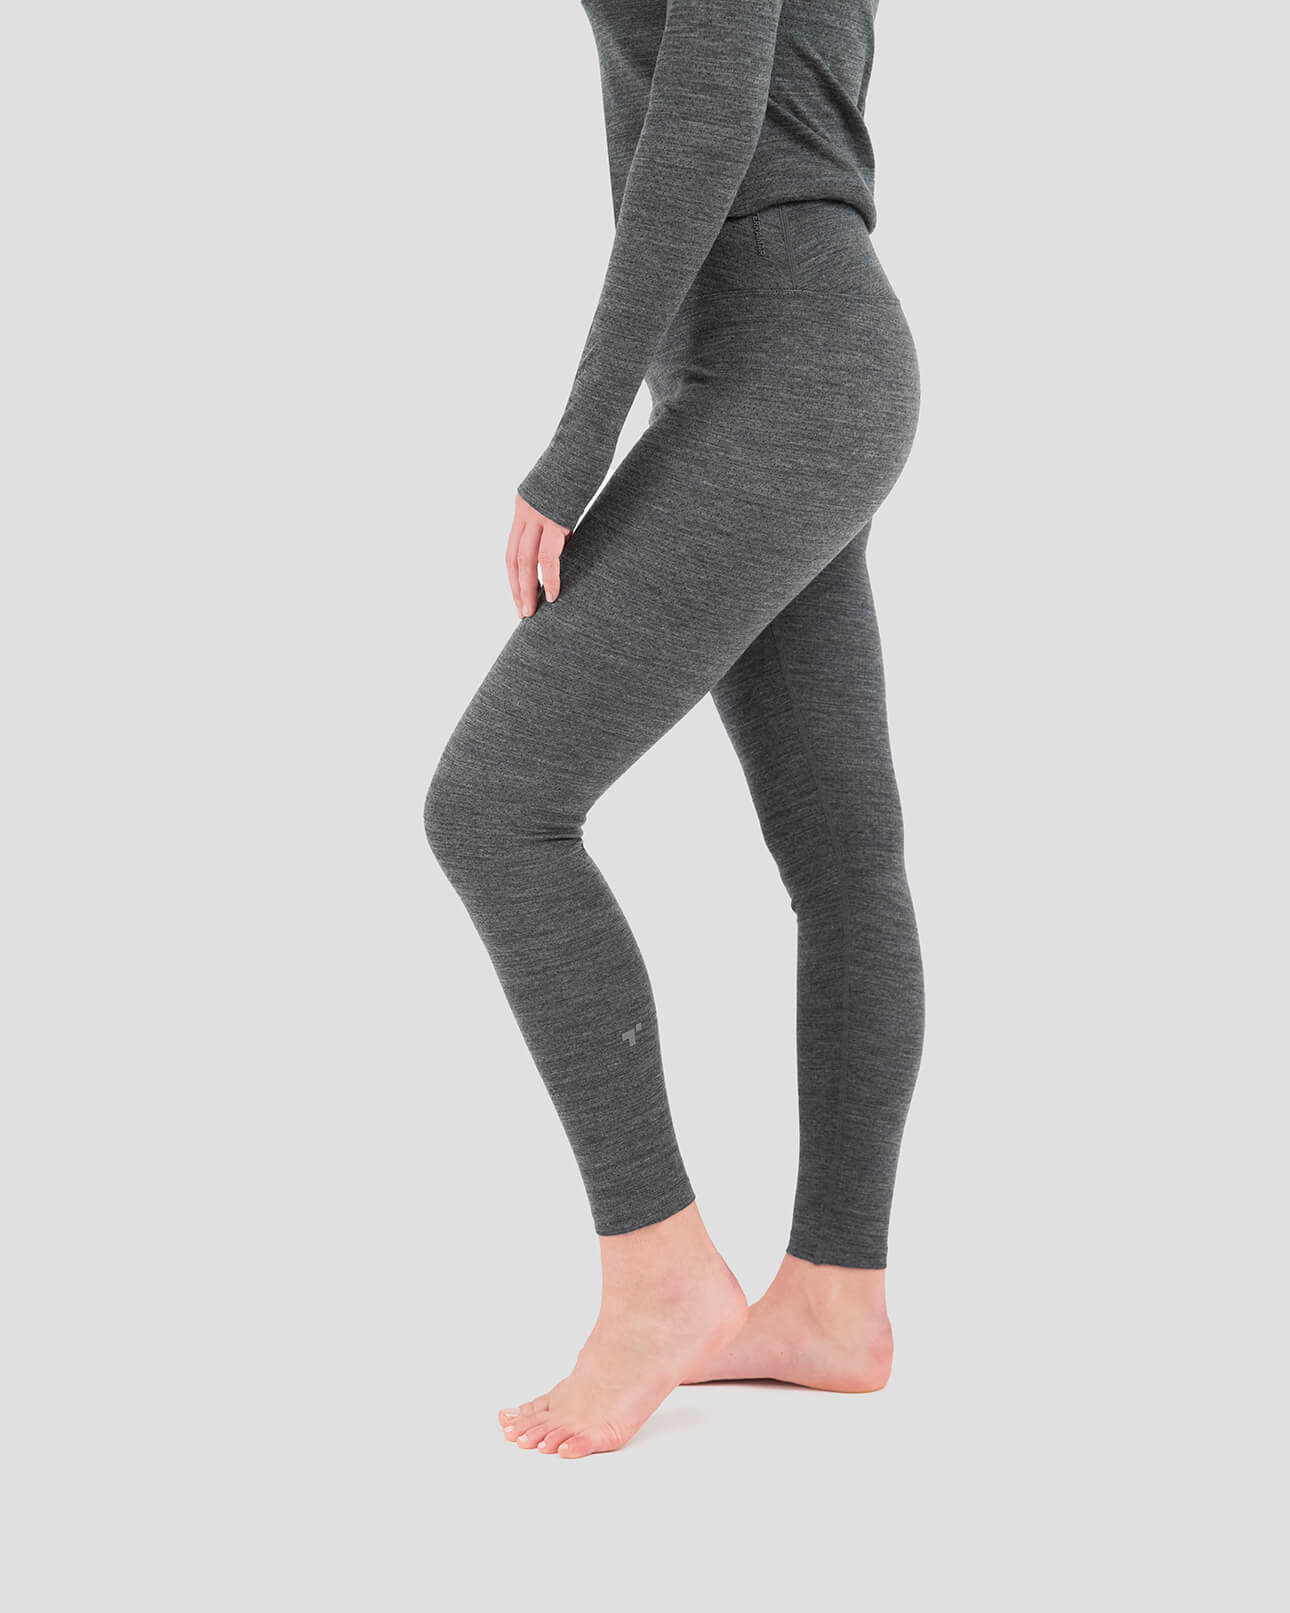 Women's Ultra Merino Pant | Color: Charcoal Heather